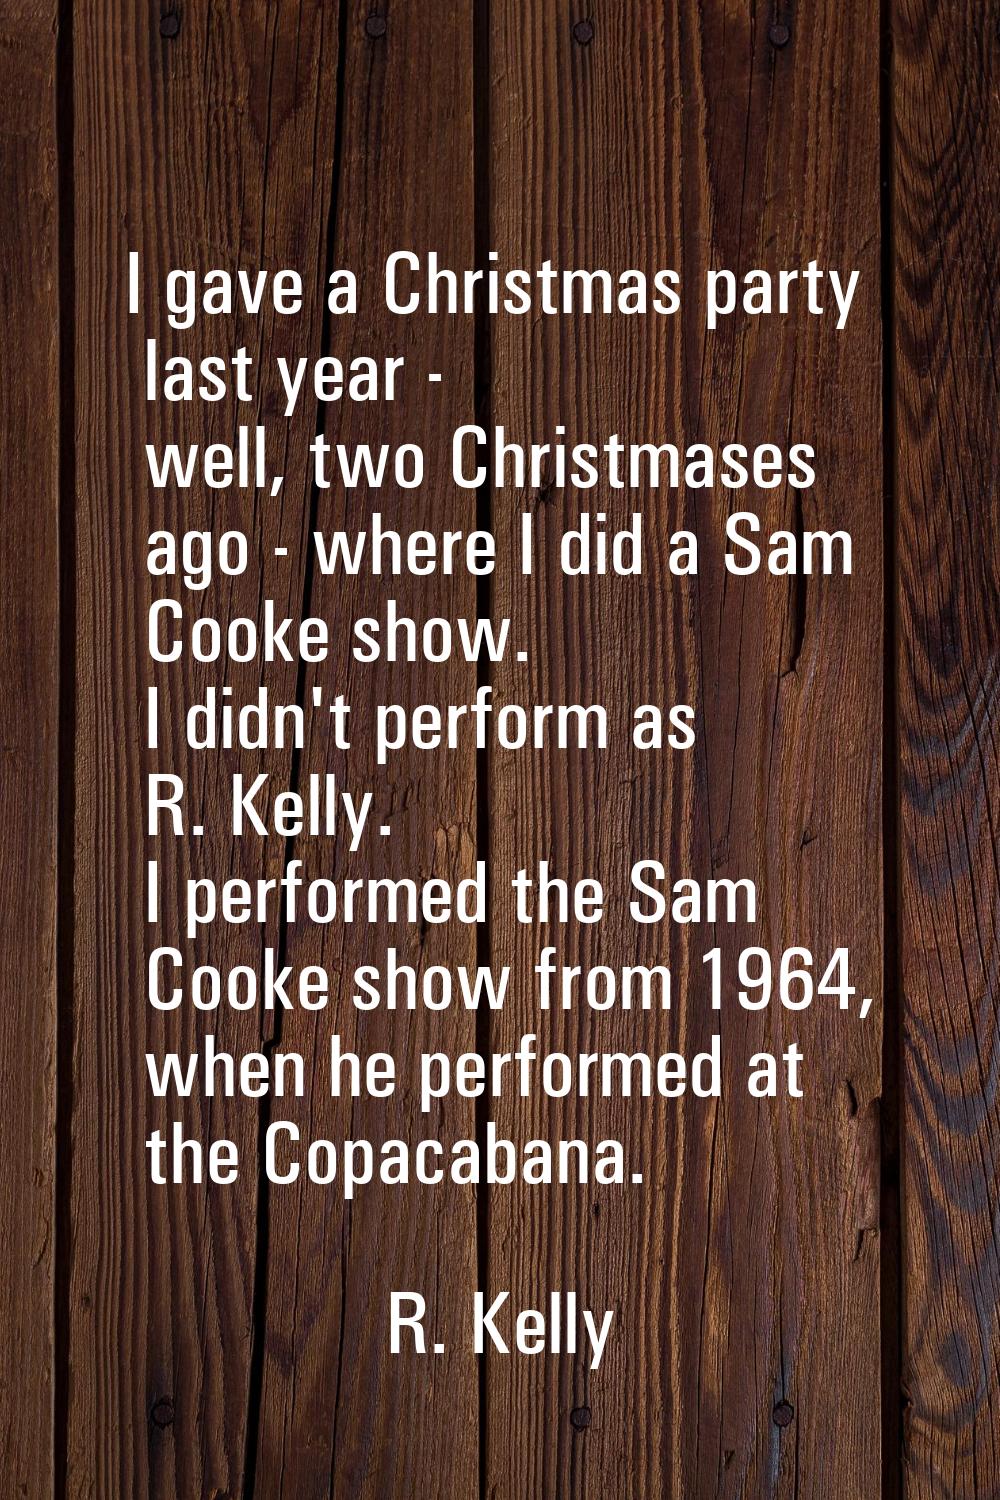 I gave a Christmas party last year - well, two Christmases ago - where I did a Sam Cooke show. I di